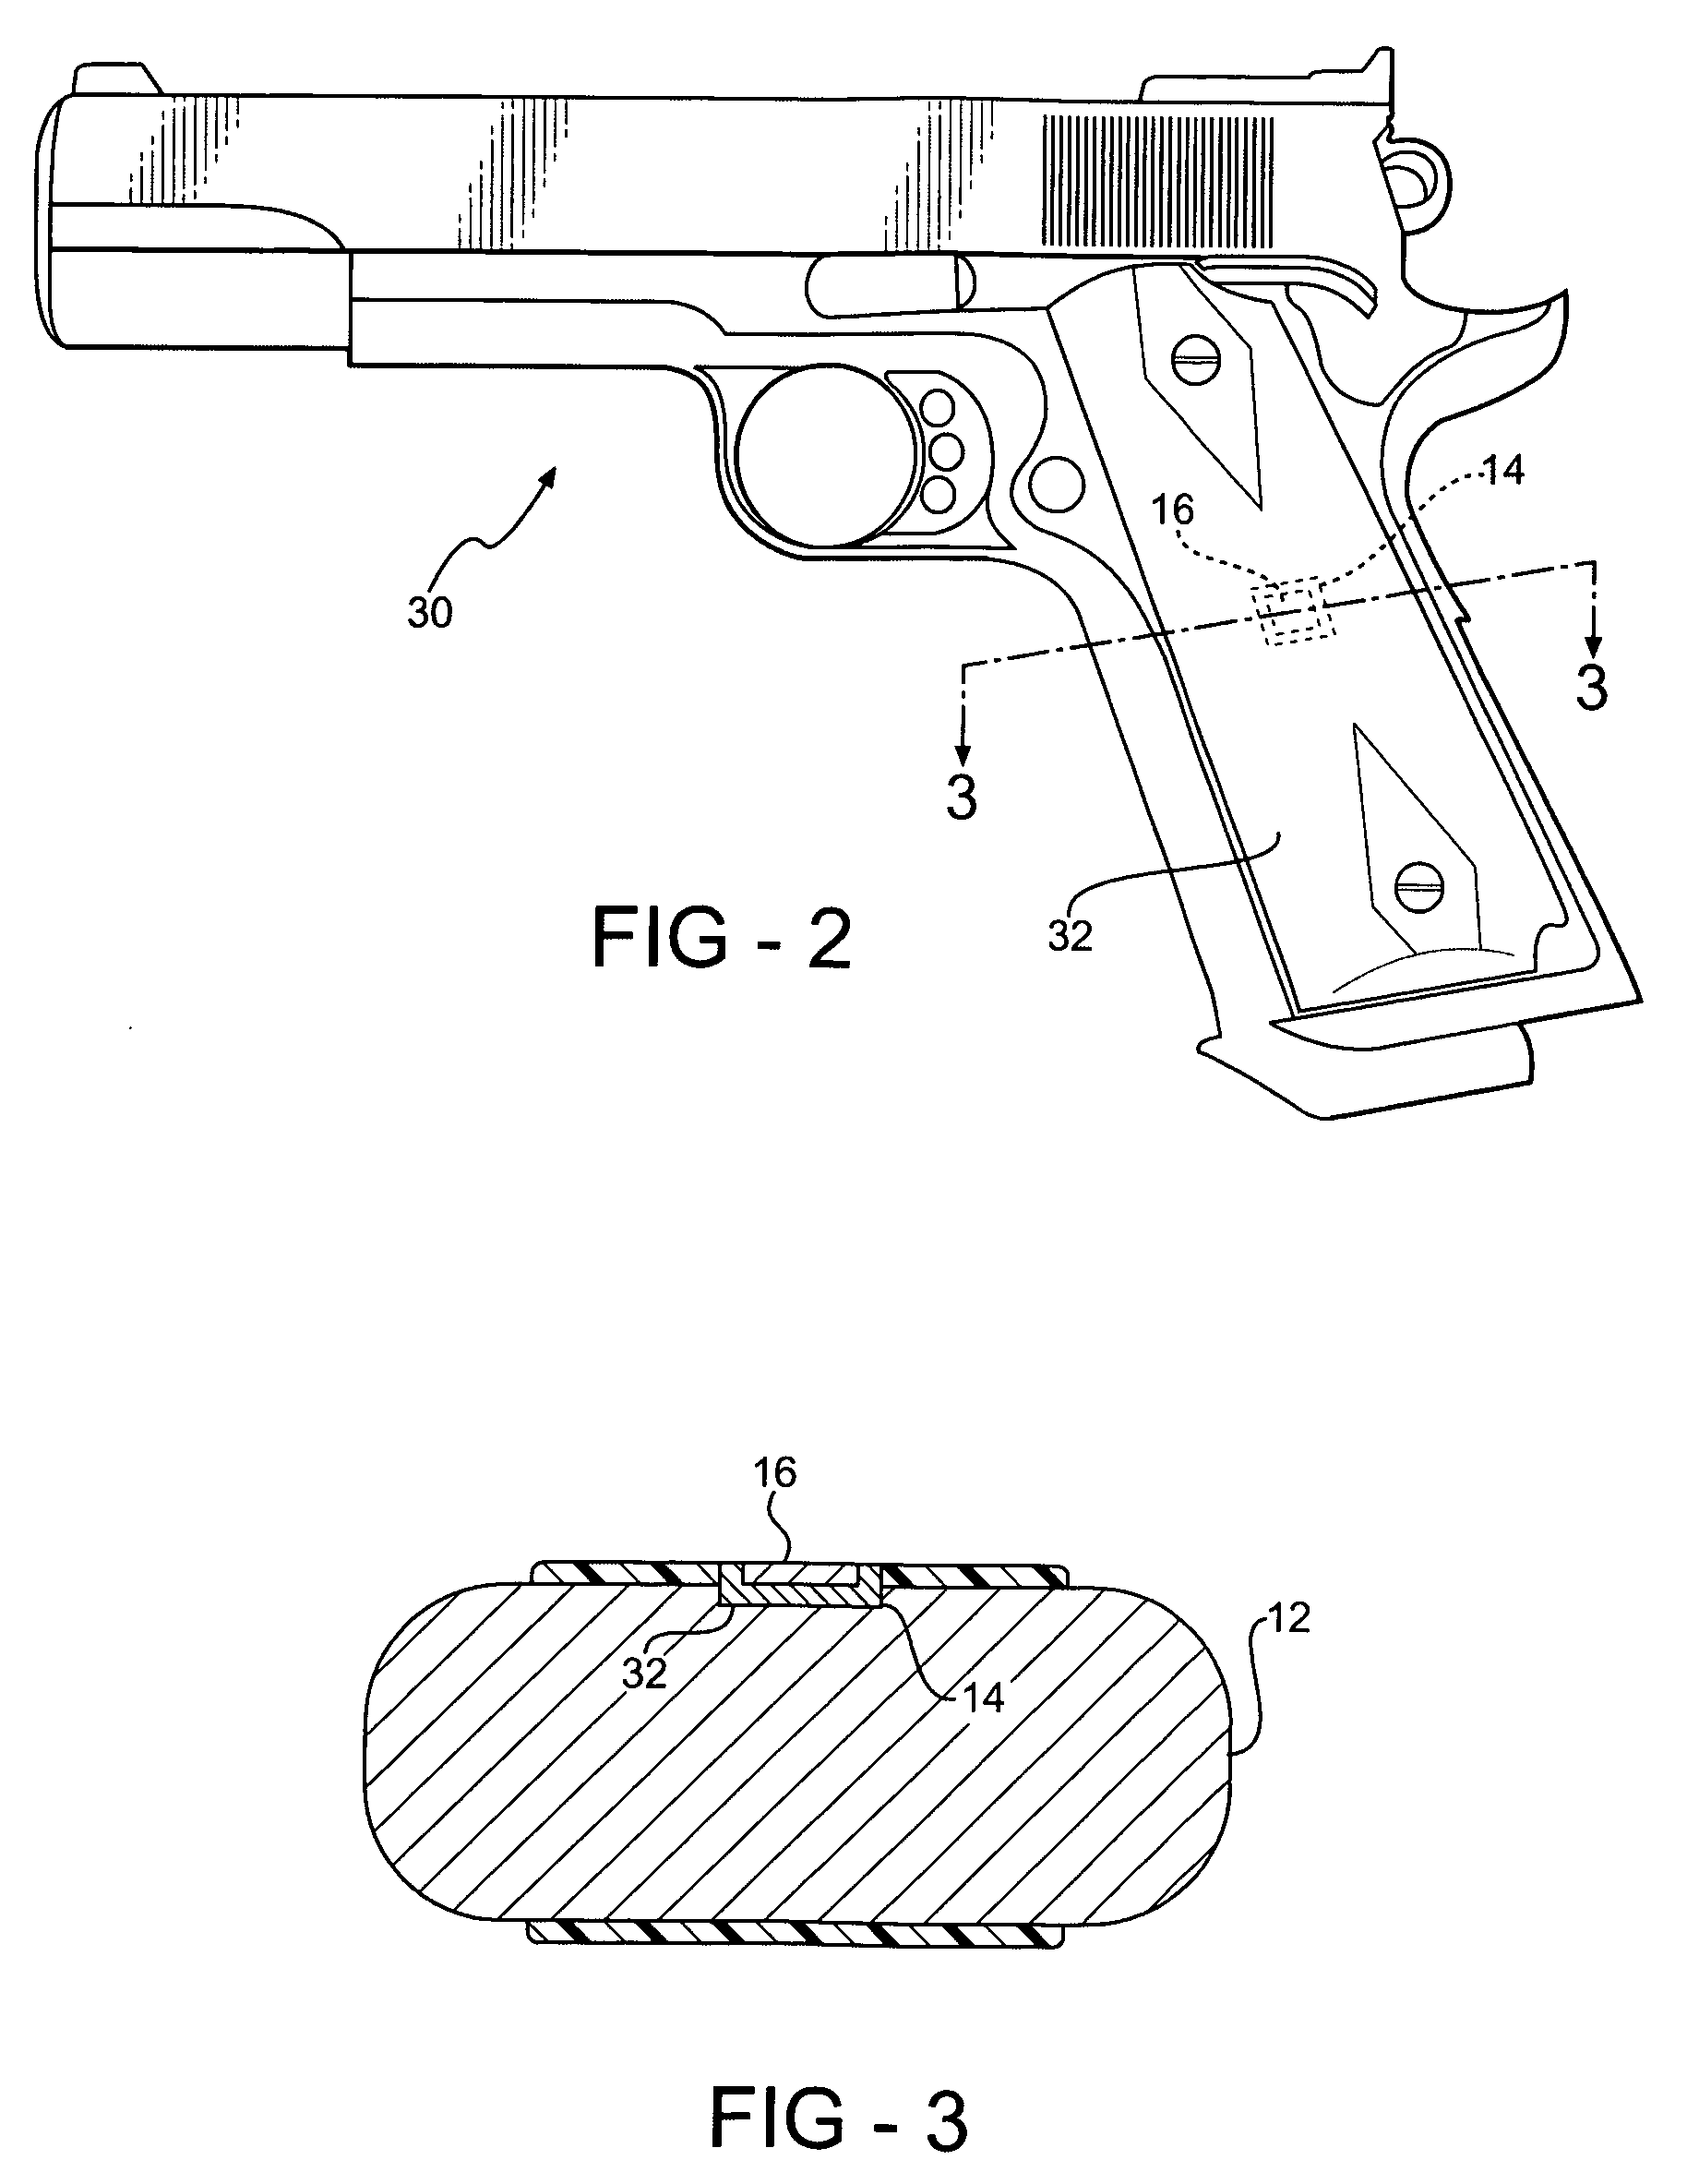 Method and apparatus for detecting and identifying firearms